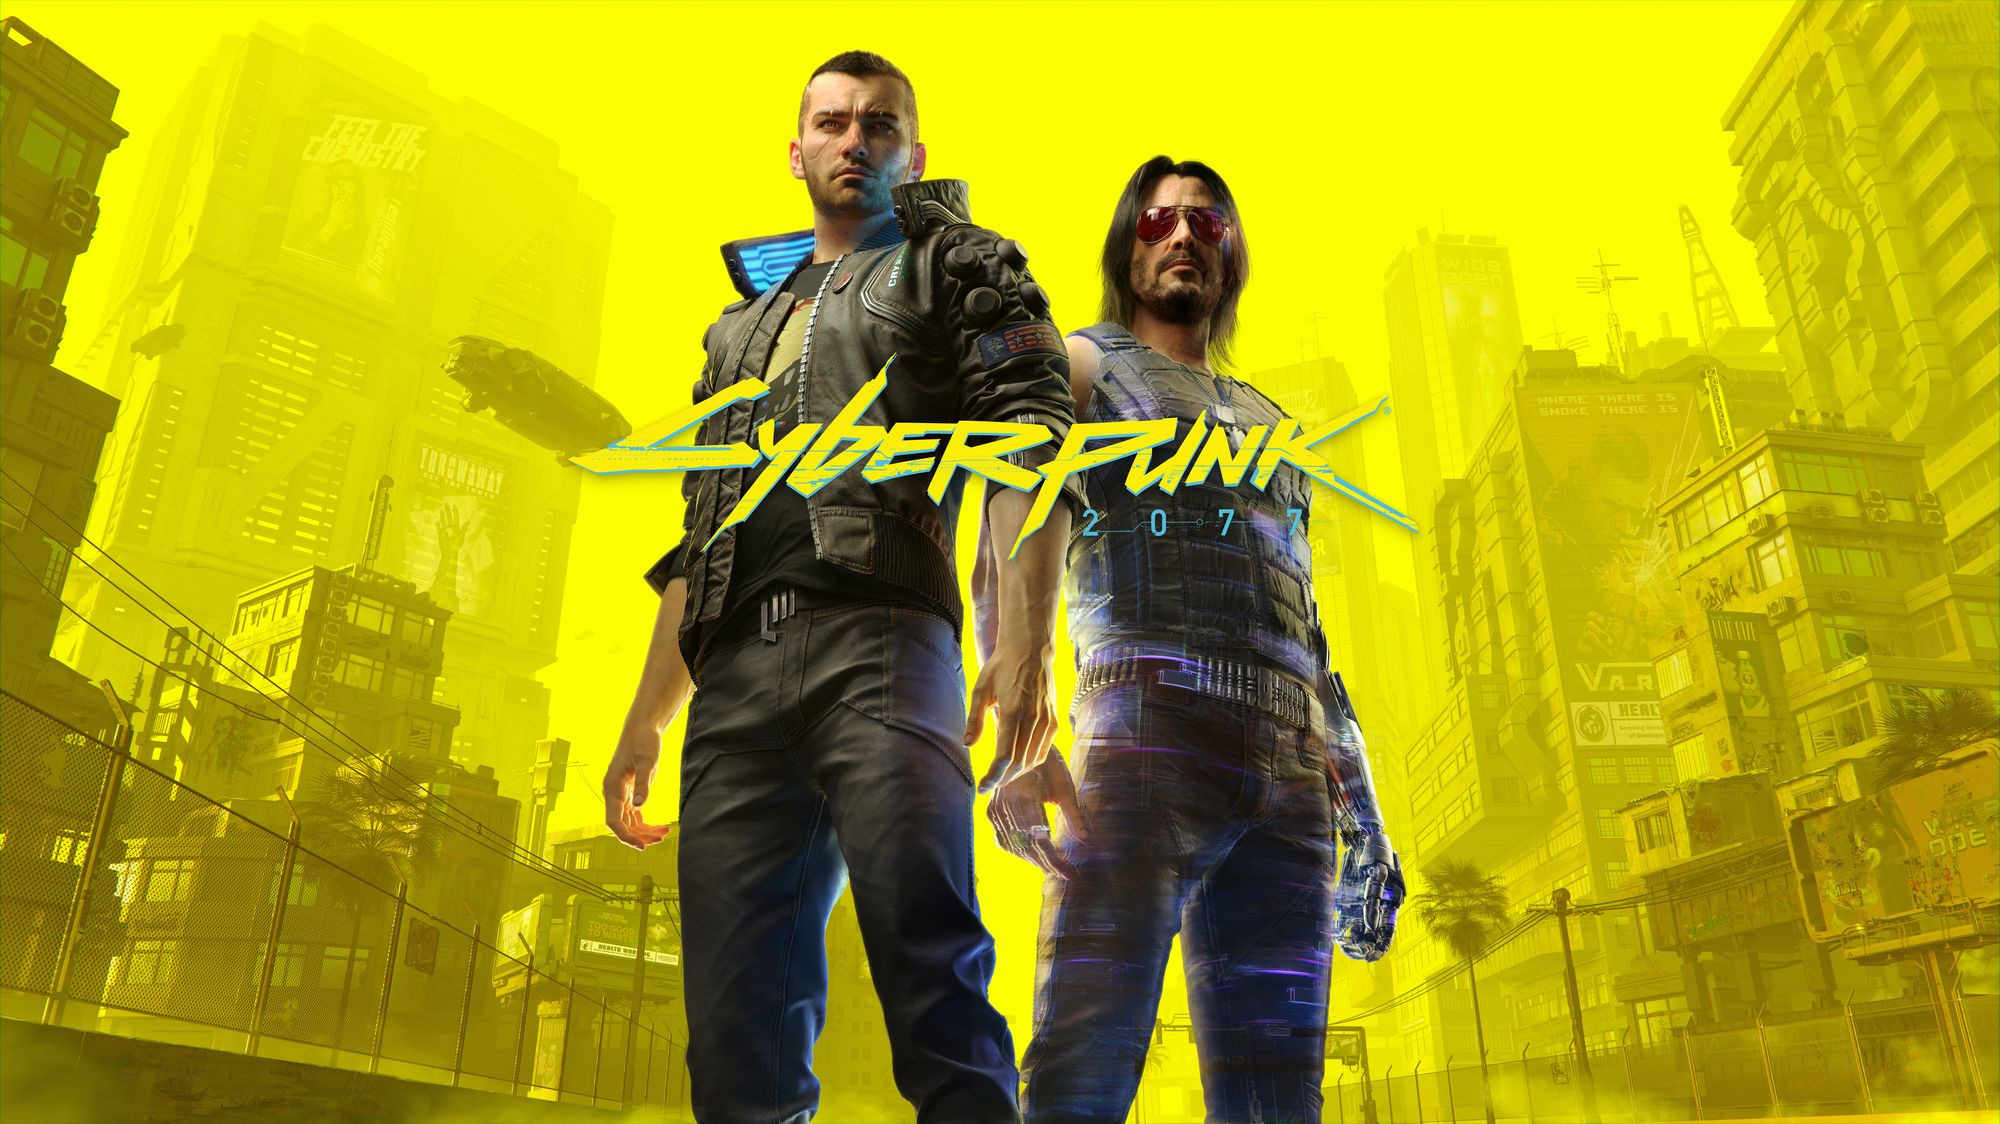 Cyberpunk 2077 director steps down – replacement already confirmed